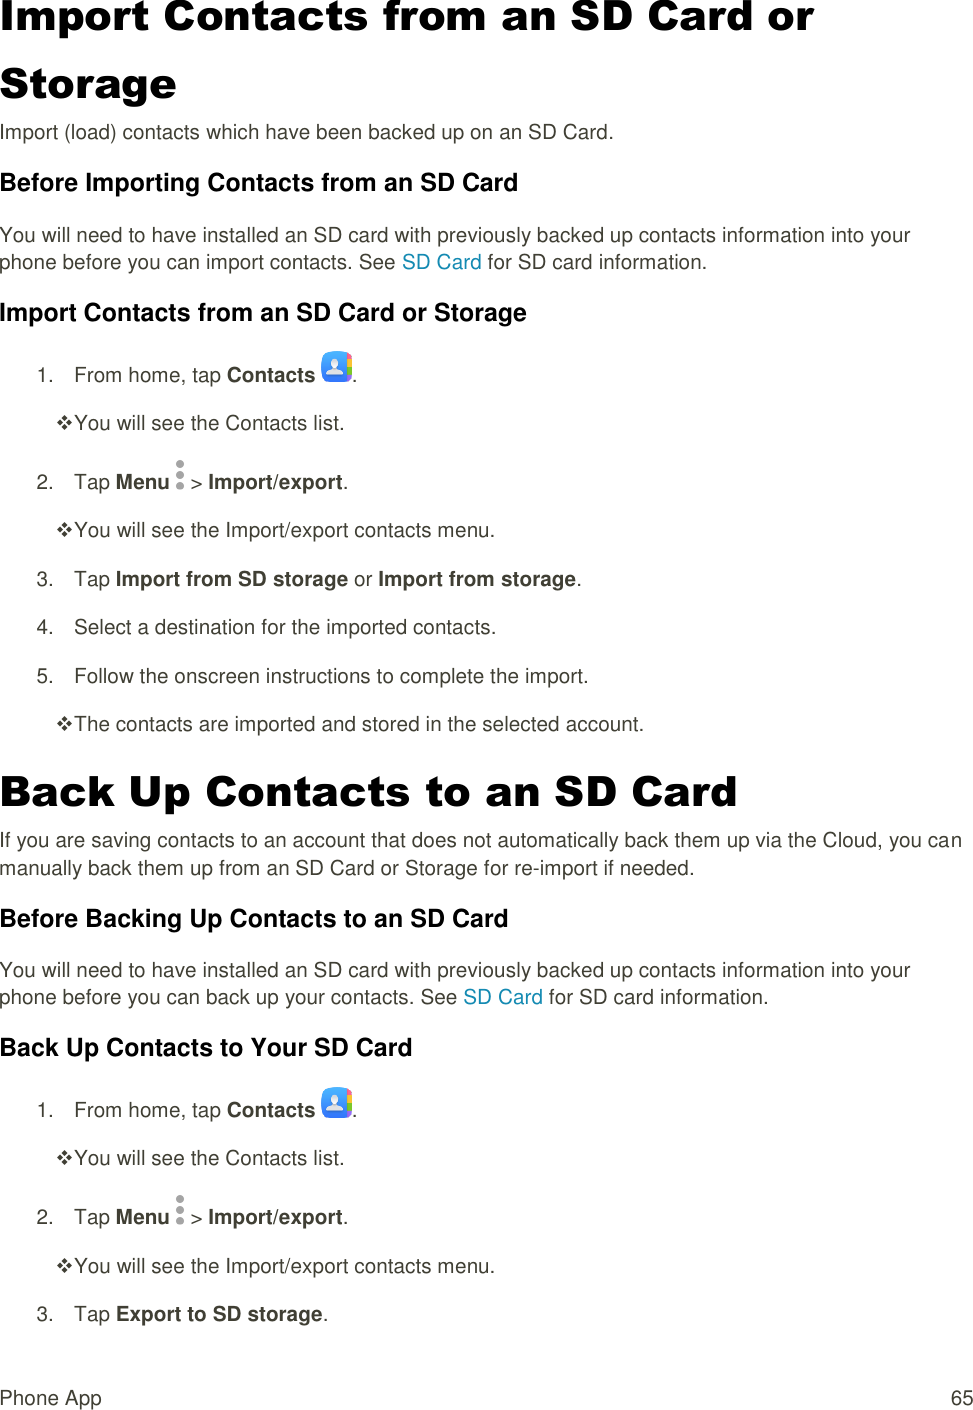 Phone App  65 Import Contacts from an SD Card or Storage  Import (load) contacts which have been backed up on an SD Card. Before Importing Contacts from an SD Card You will need to have installed an SD card with previously backed up contacts information into your phone before you can import contacts. See SD Card for SD card information. Import Contacts from an SD Card or Storage 1.  From home, tap Contacts  .  You will see the Contacts list. 2.  Tap Menu   &gt; Import/export.  You will see the Import/export contacts menu. 3.  Tap Import from SD storage or Import from storage. 4.  Select a destination for the imported contacts. 5.  Follow the onscreen instructions to complete the import.  The contacts are imported and stored in the selected account. Back Up Contacts to an SD Card If you are saving contacts to an account that does not automatically back them up via the Cloud, you can manually back them up from an SD Card or Storage for re-import if needed. Before Backing Up Contacts to an SD Card You will need to have installed an SD card with previously backed up contacts information into your phone before you can back up your contacts. See SD Card for SD card information. Back Up Contacts to Your SD Card 1.  From home, tap Contacts  .  You will see the Contacts list. 2.  Tap Menu   &gt; Import/export.  You will see the Import/export contacts menu. 3.  Tap Export to SD storage. 